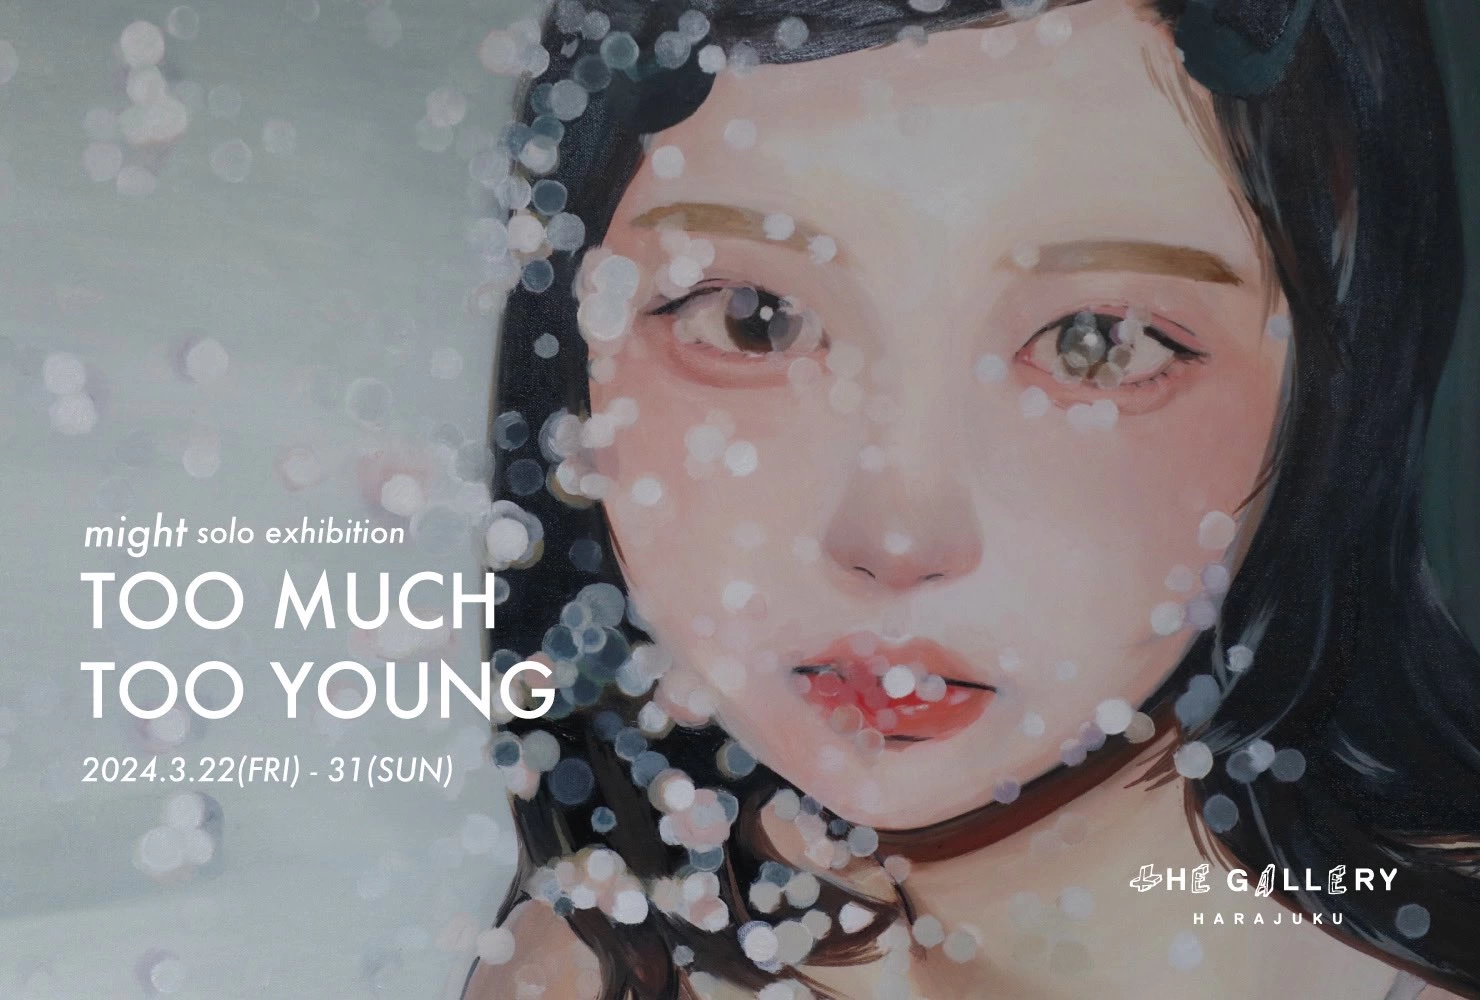 might solo exhibition “TOO MUCH TOO YOUNG”